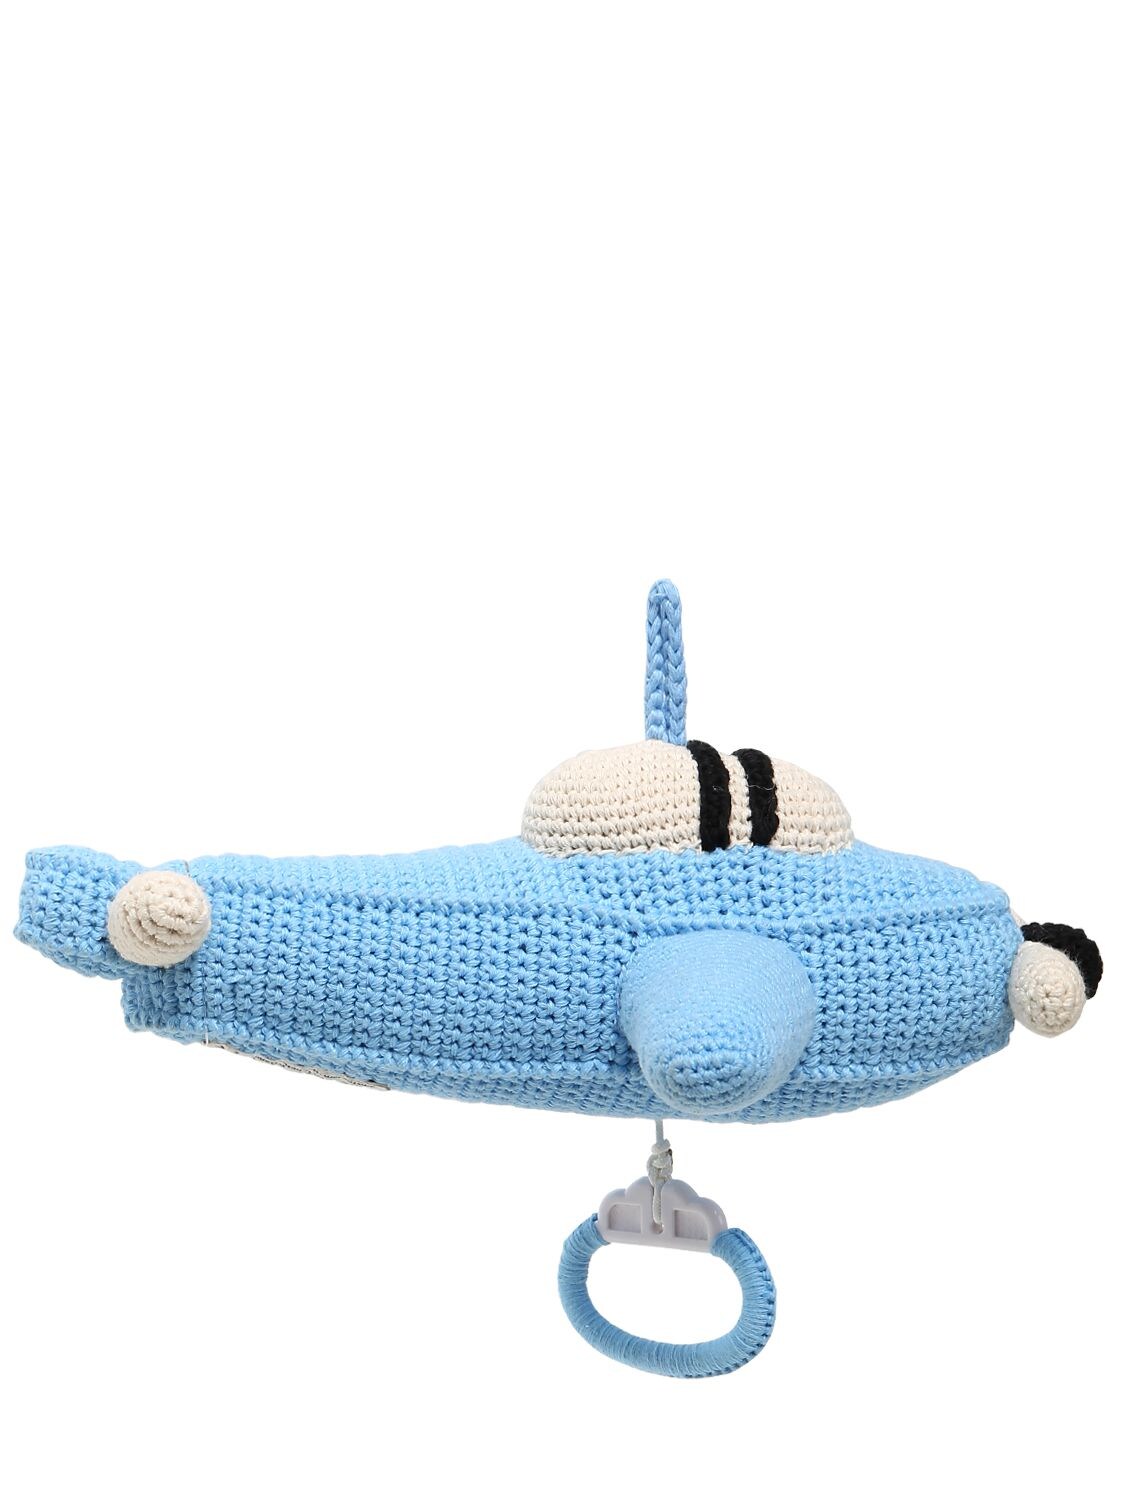 Anne-claire Petit Kids' Hand-crocheted Airplane With Music Box In Light Blue